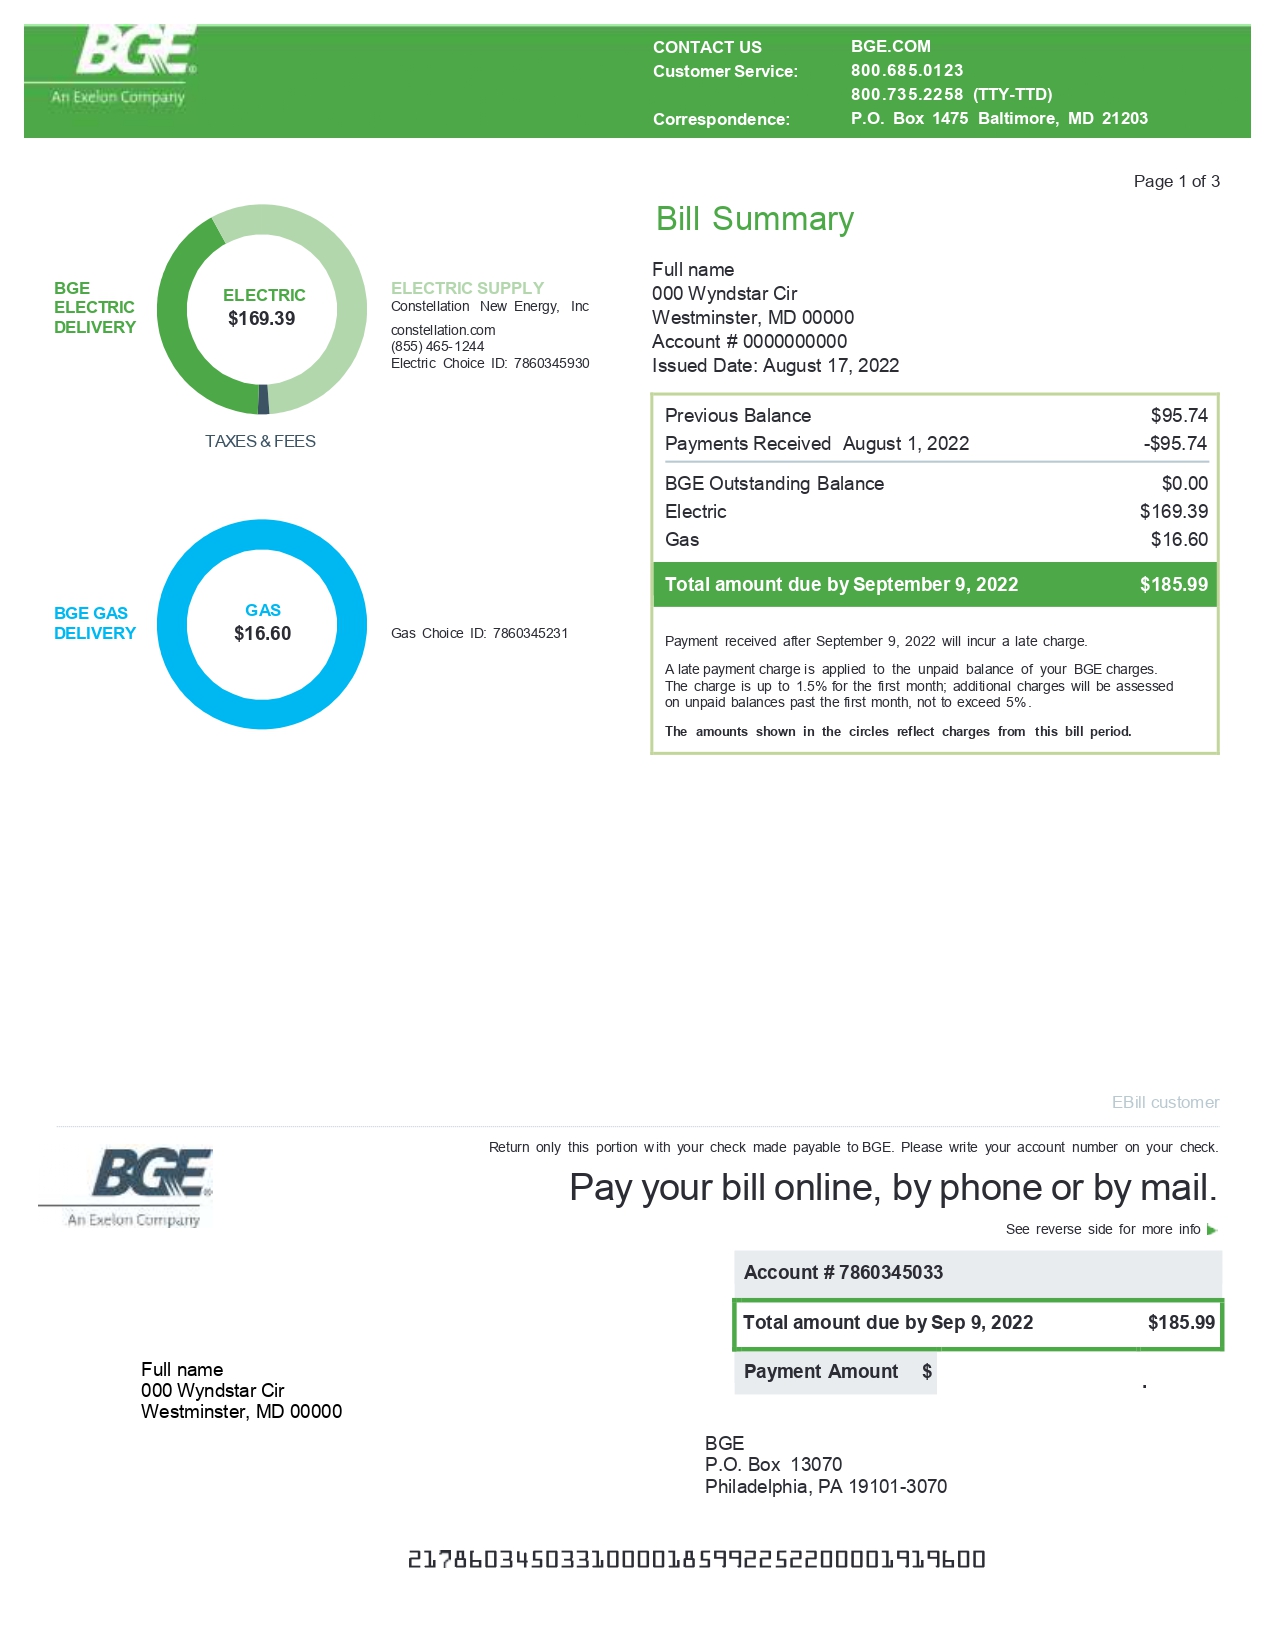 Baltimore Gas and Electric Company- BGE Utility Bill Template